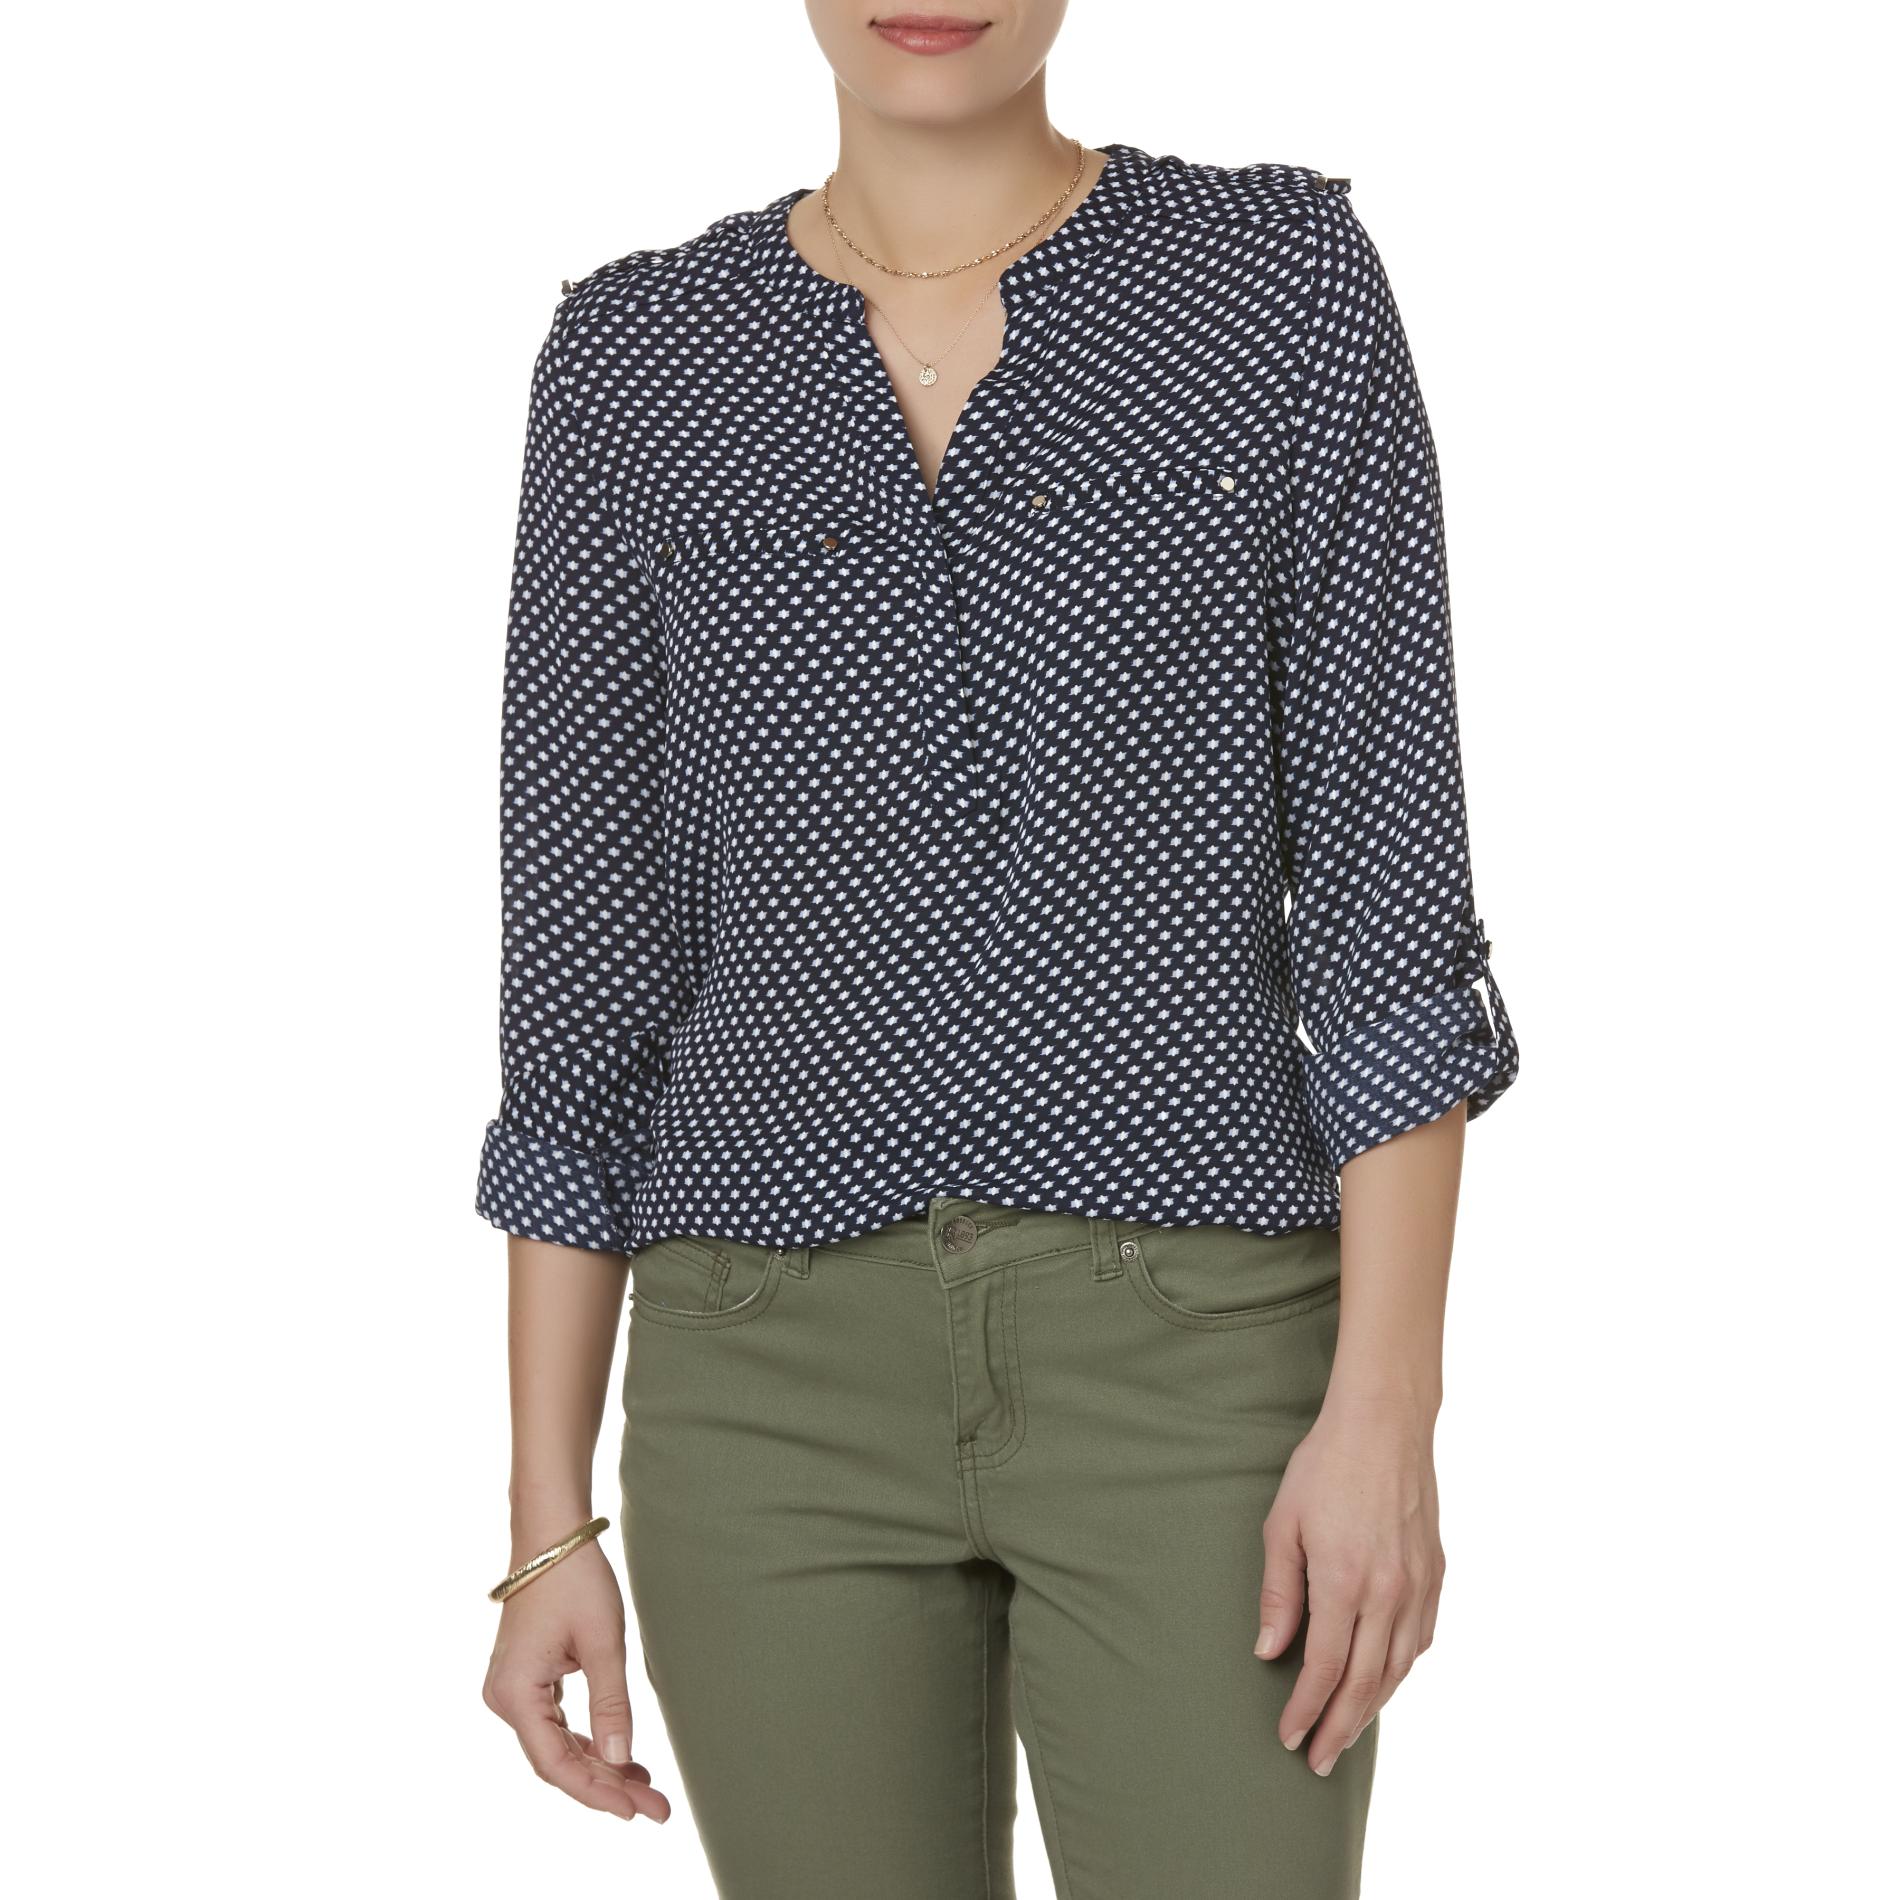 Simply Styled Women's Utility Blouse - Dots